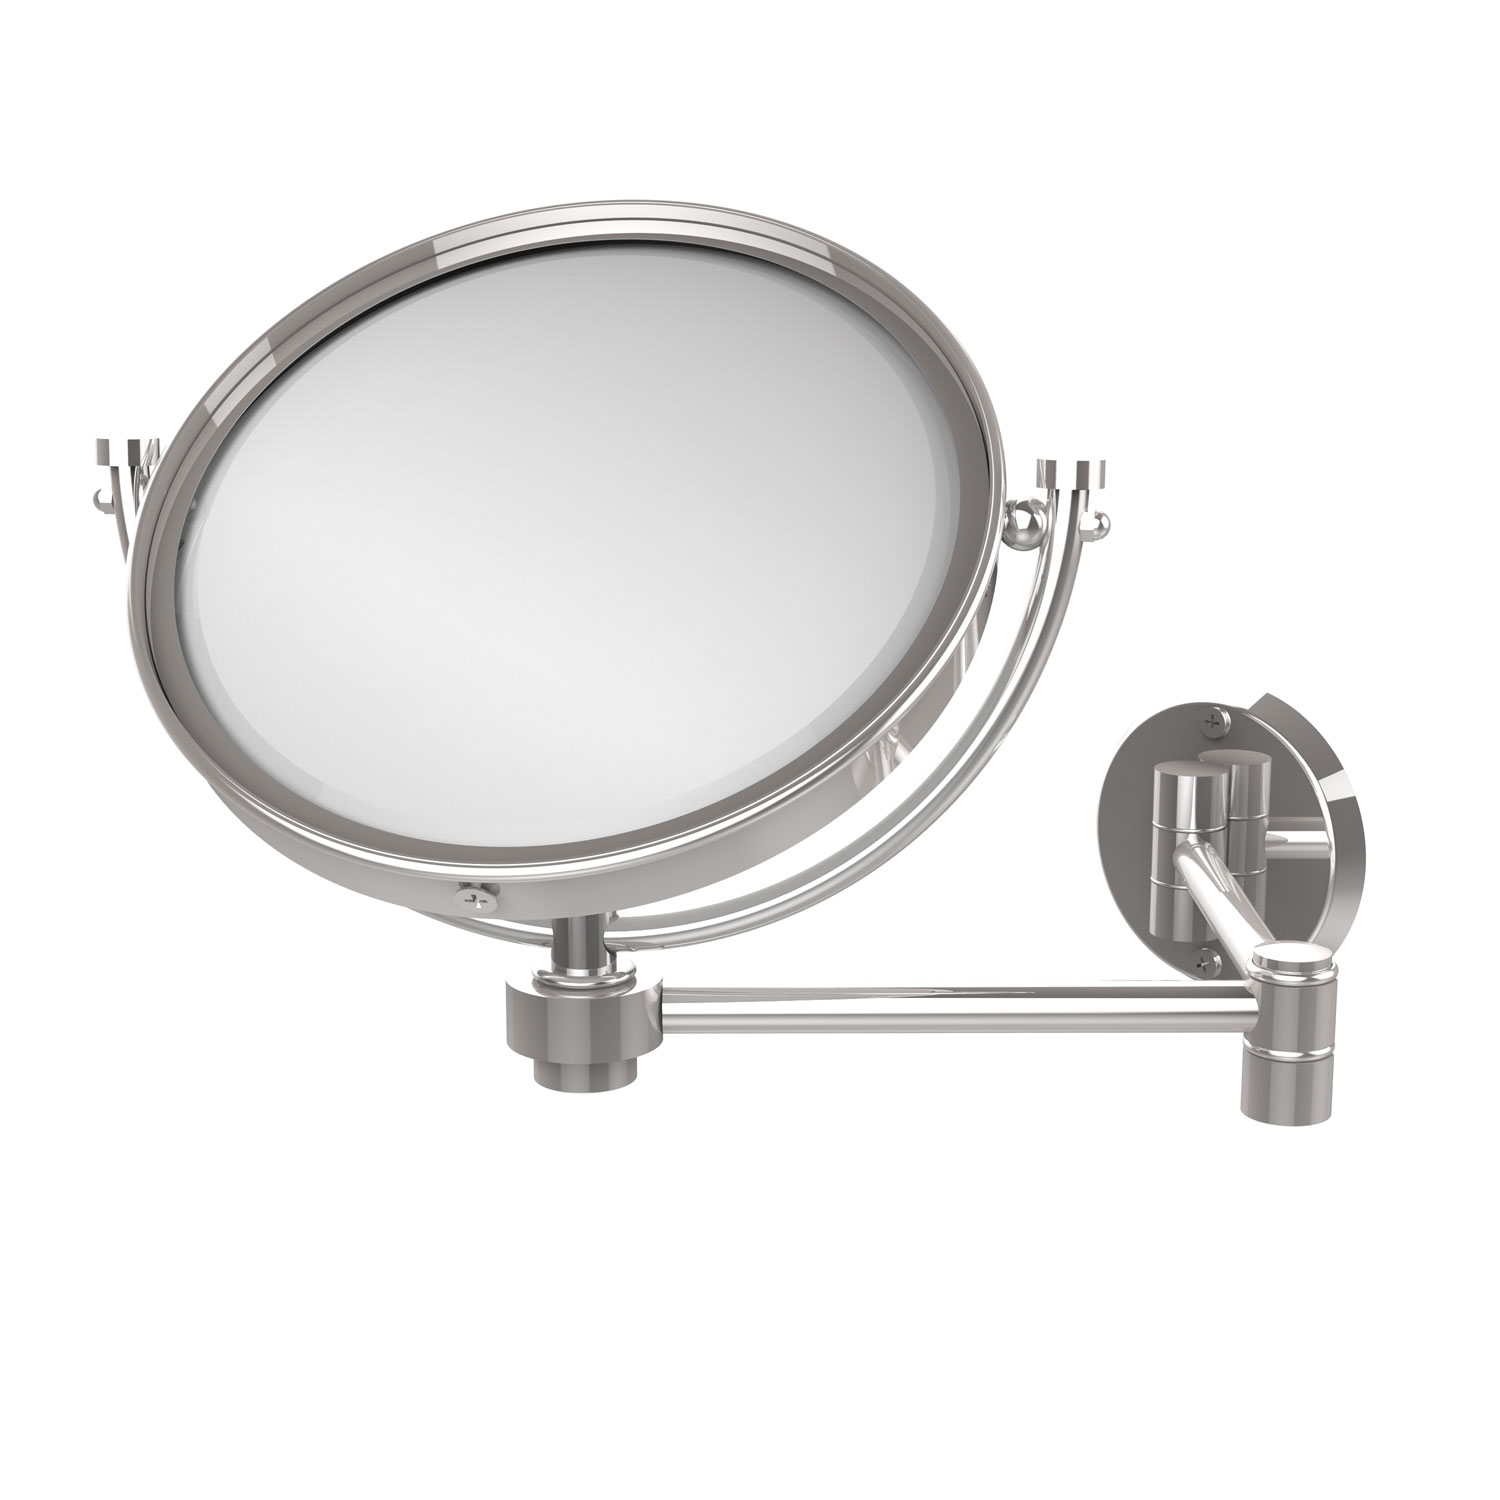 8 Inch Wall Mounted Extending Make-Up Mirror 5X Magnification, Polished Chrome